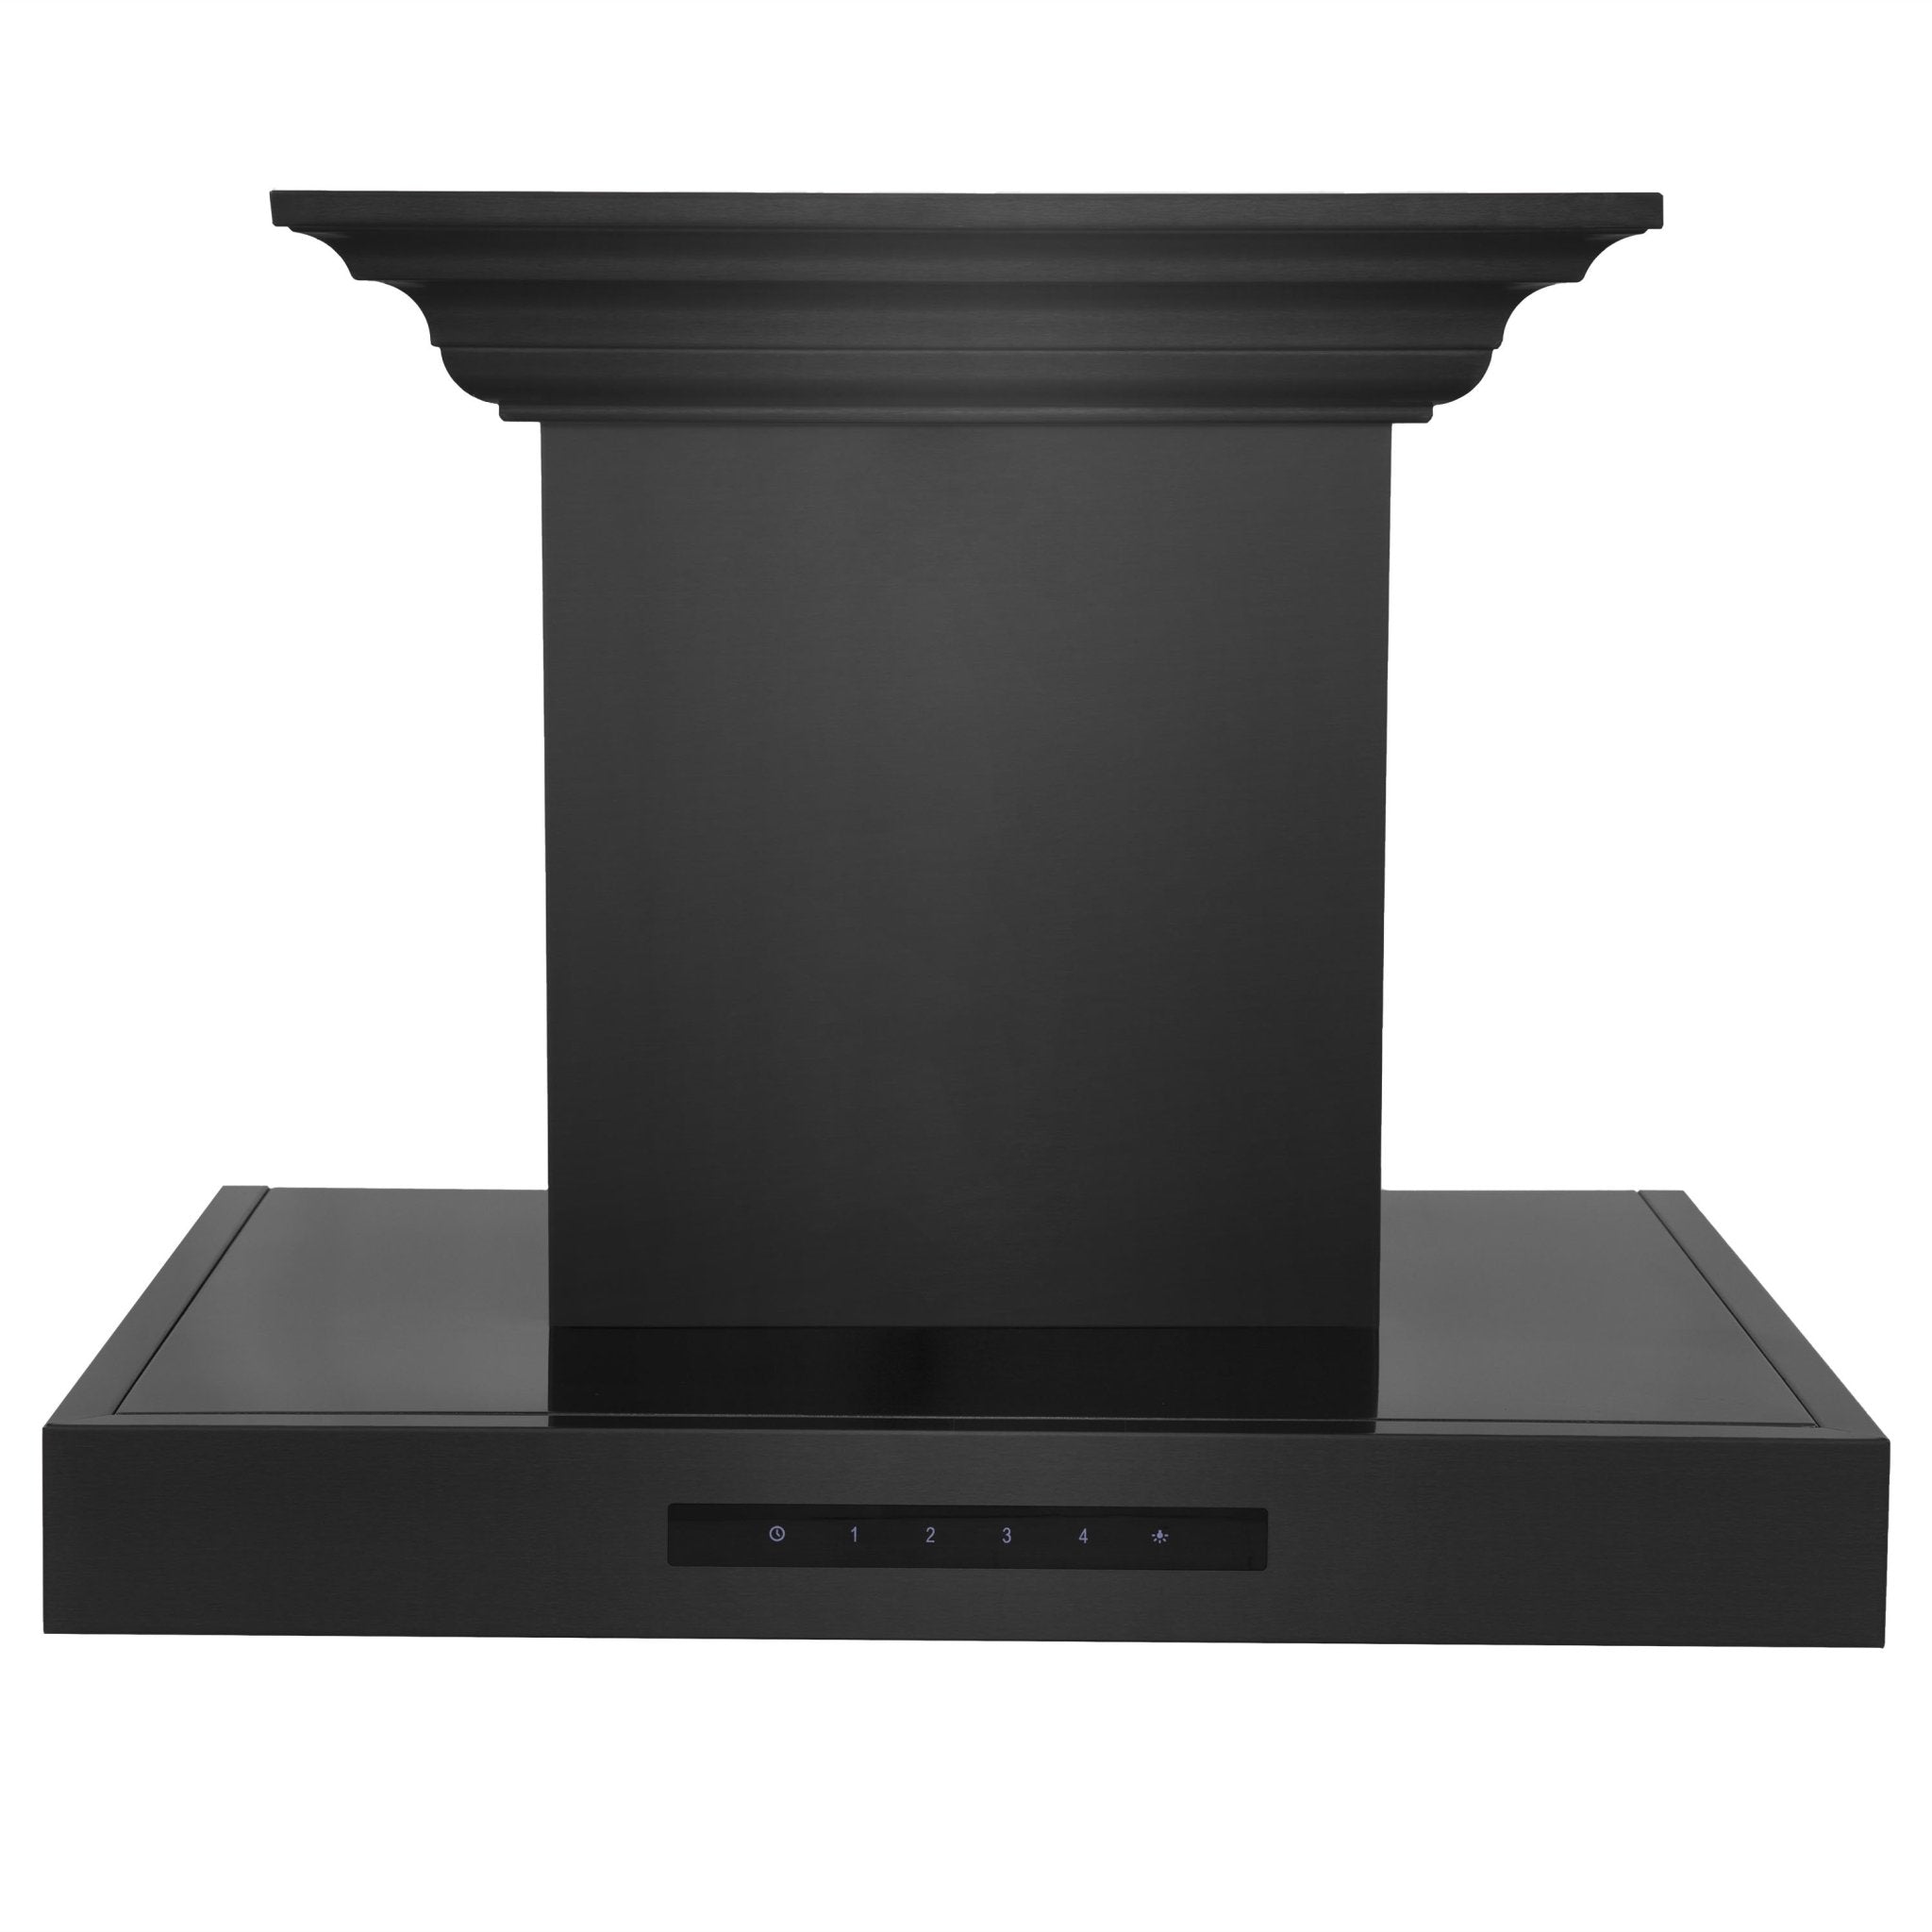 24" ZLINE CrownSound‚ Ducted Vent Wall Mount Range Hood in Black Stainless Steel with Built-in Bluetooth Speakers (BSKENCRN-BT-24)